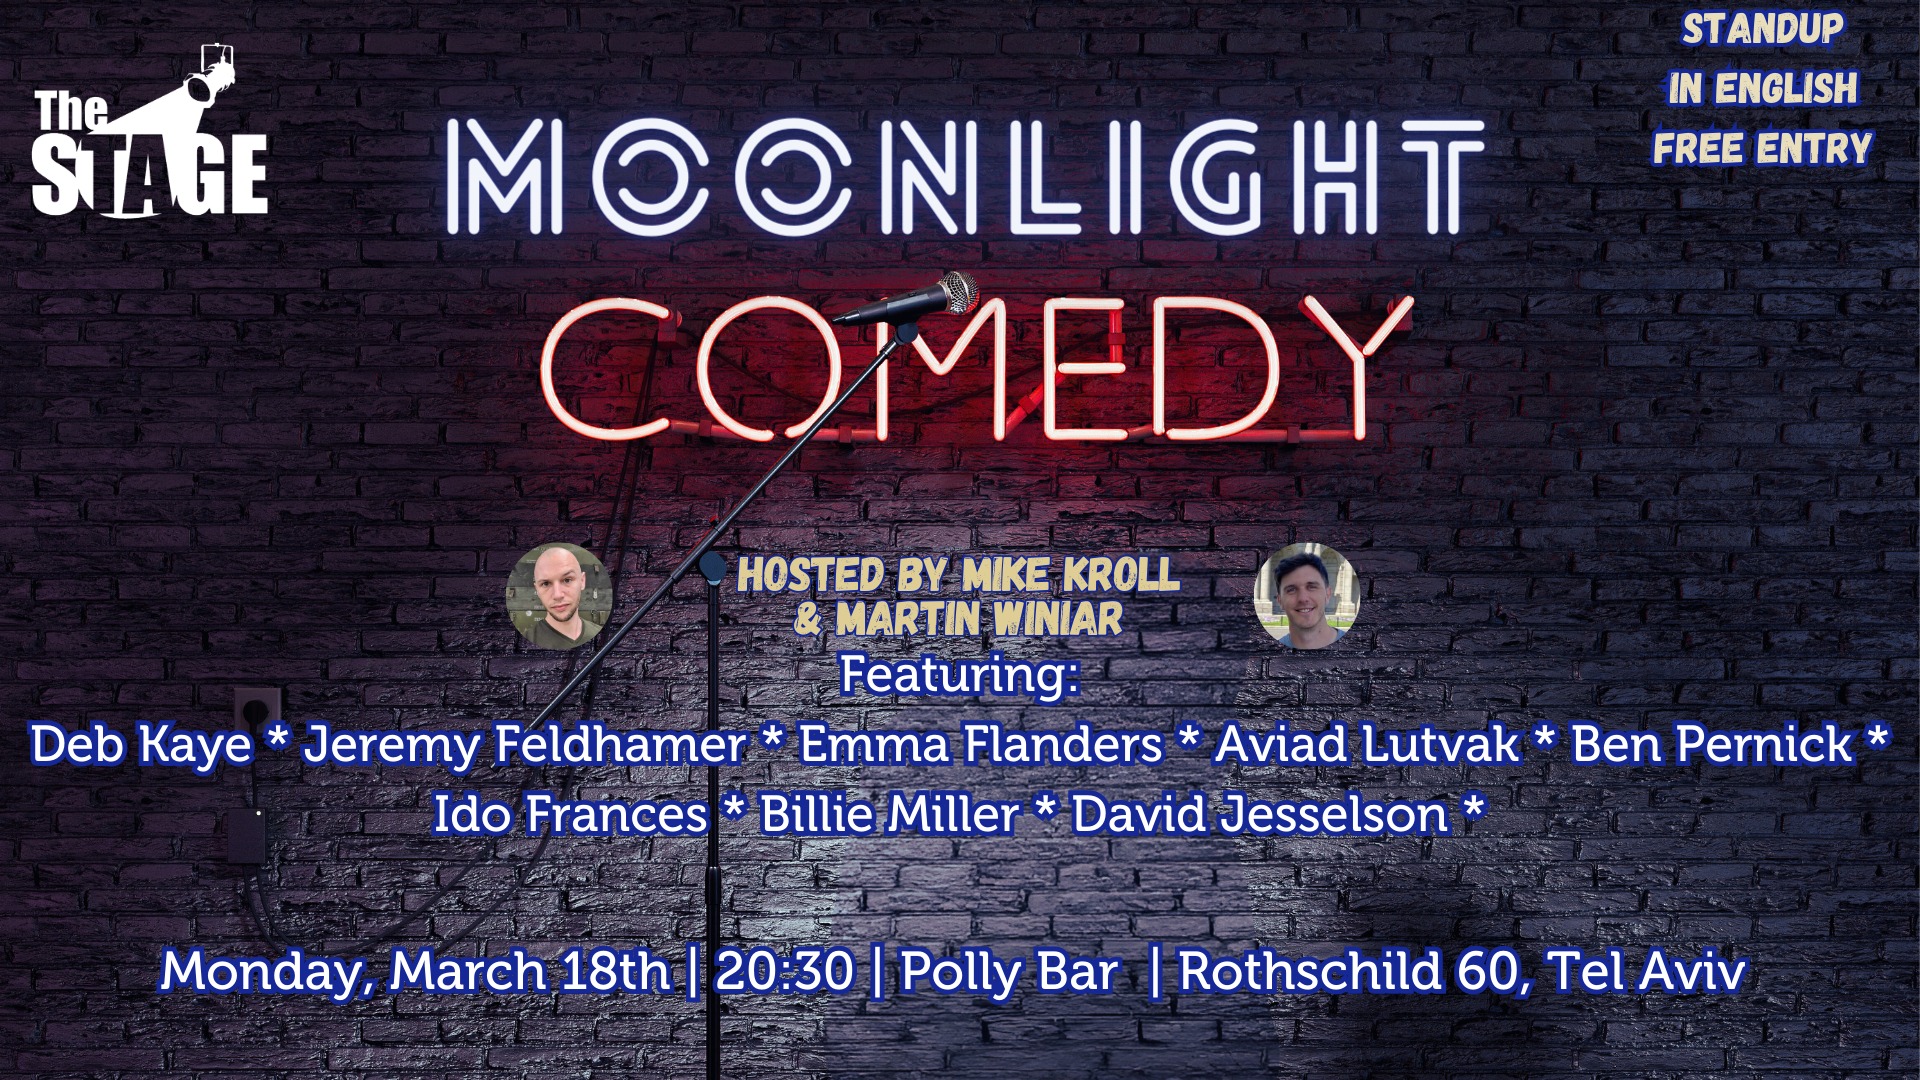 March Moonlight Comedy - Free Standup in English! @ Polly Bar